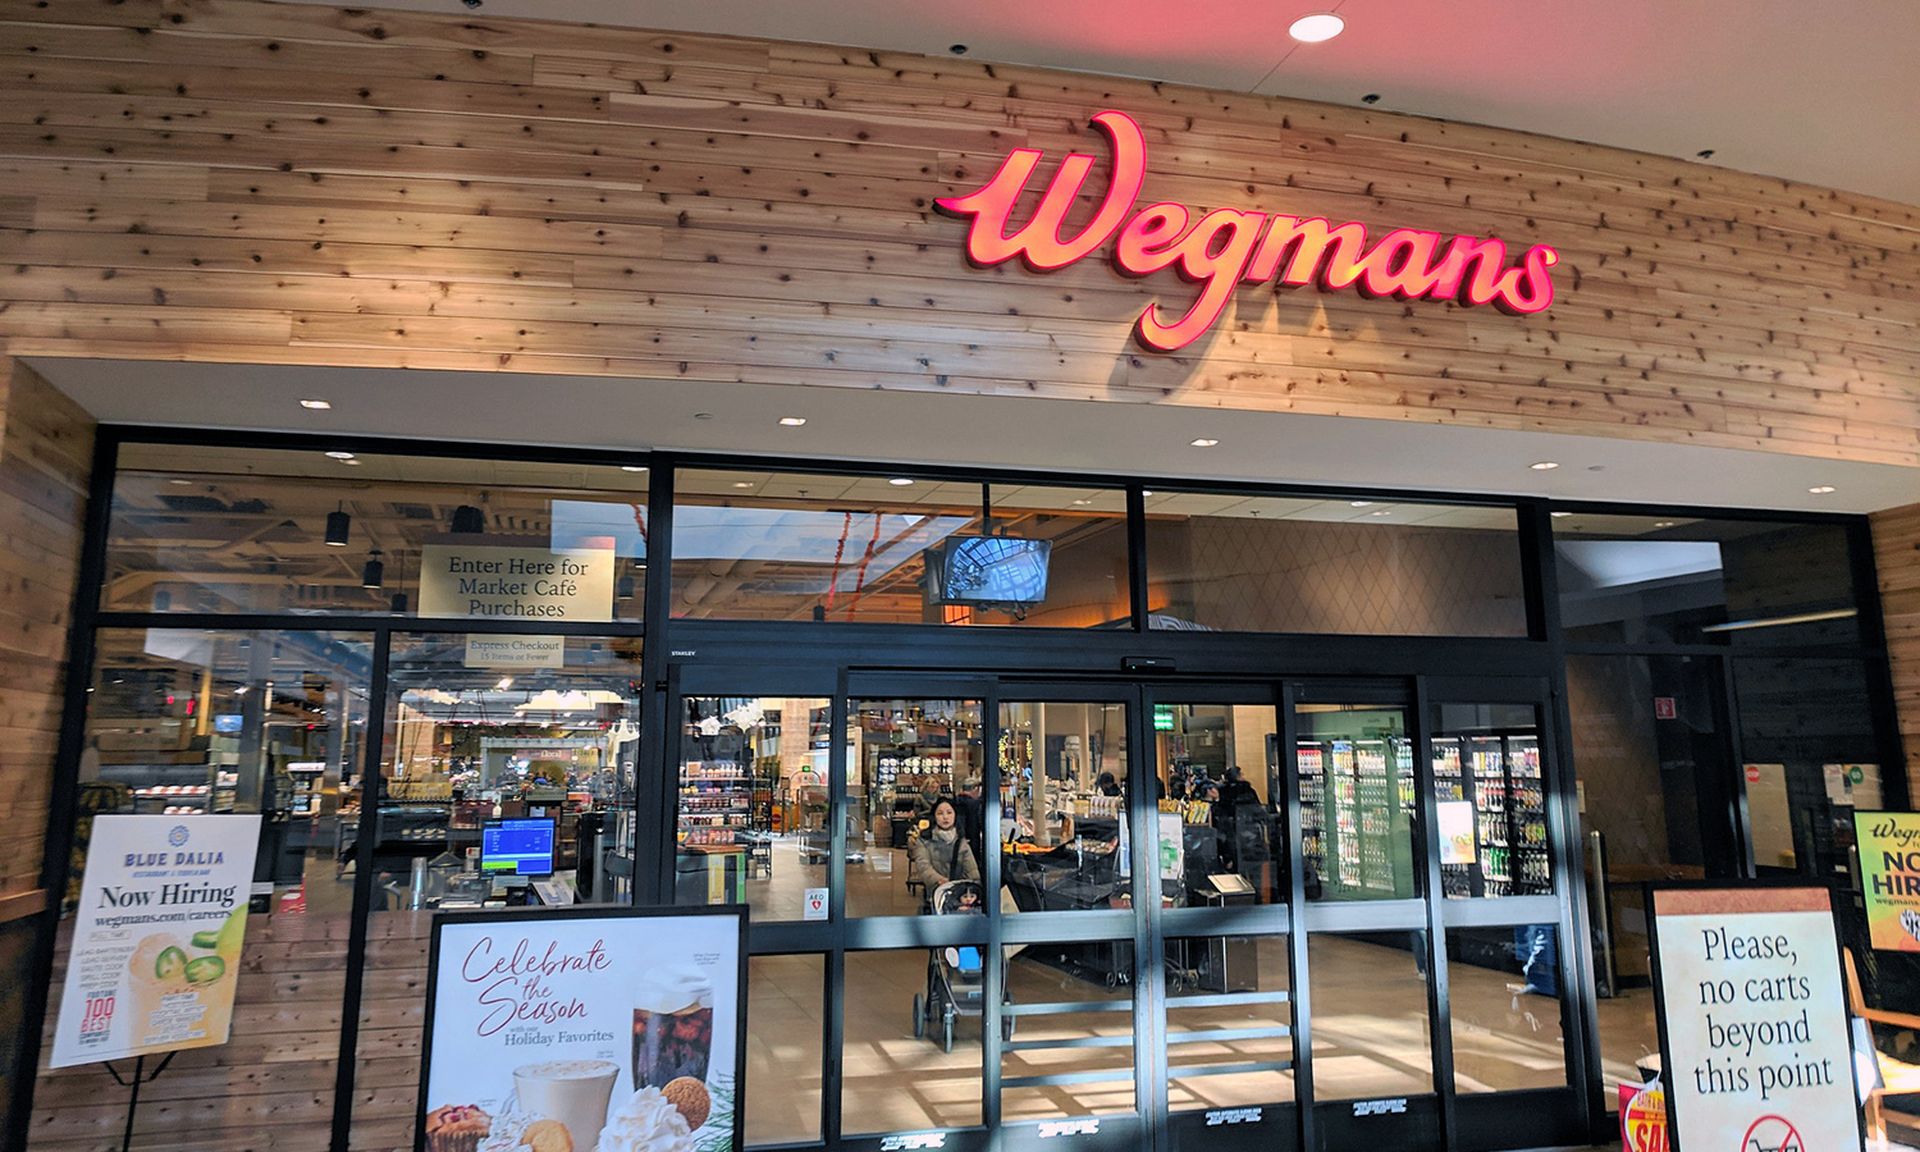 Wegmans paid the state of New York $400,000 and agreed to upgrade its cybersecurity operations after data of more than 3 million customers were exposed in a cloud misconfiguration. (&#8220;Wegmans (Natick Mall, Natick, Massachusetts)&#8221; by jjbers is licensed under CC BY 2.0.)